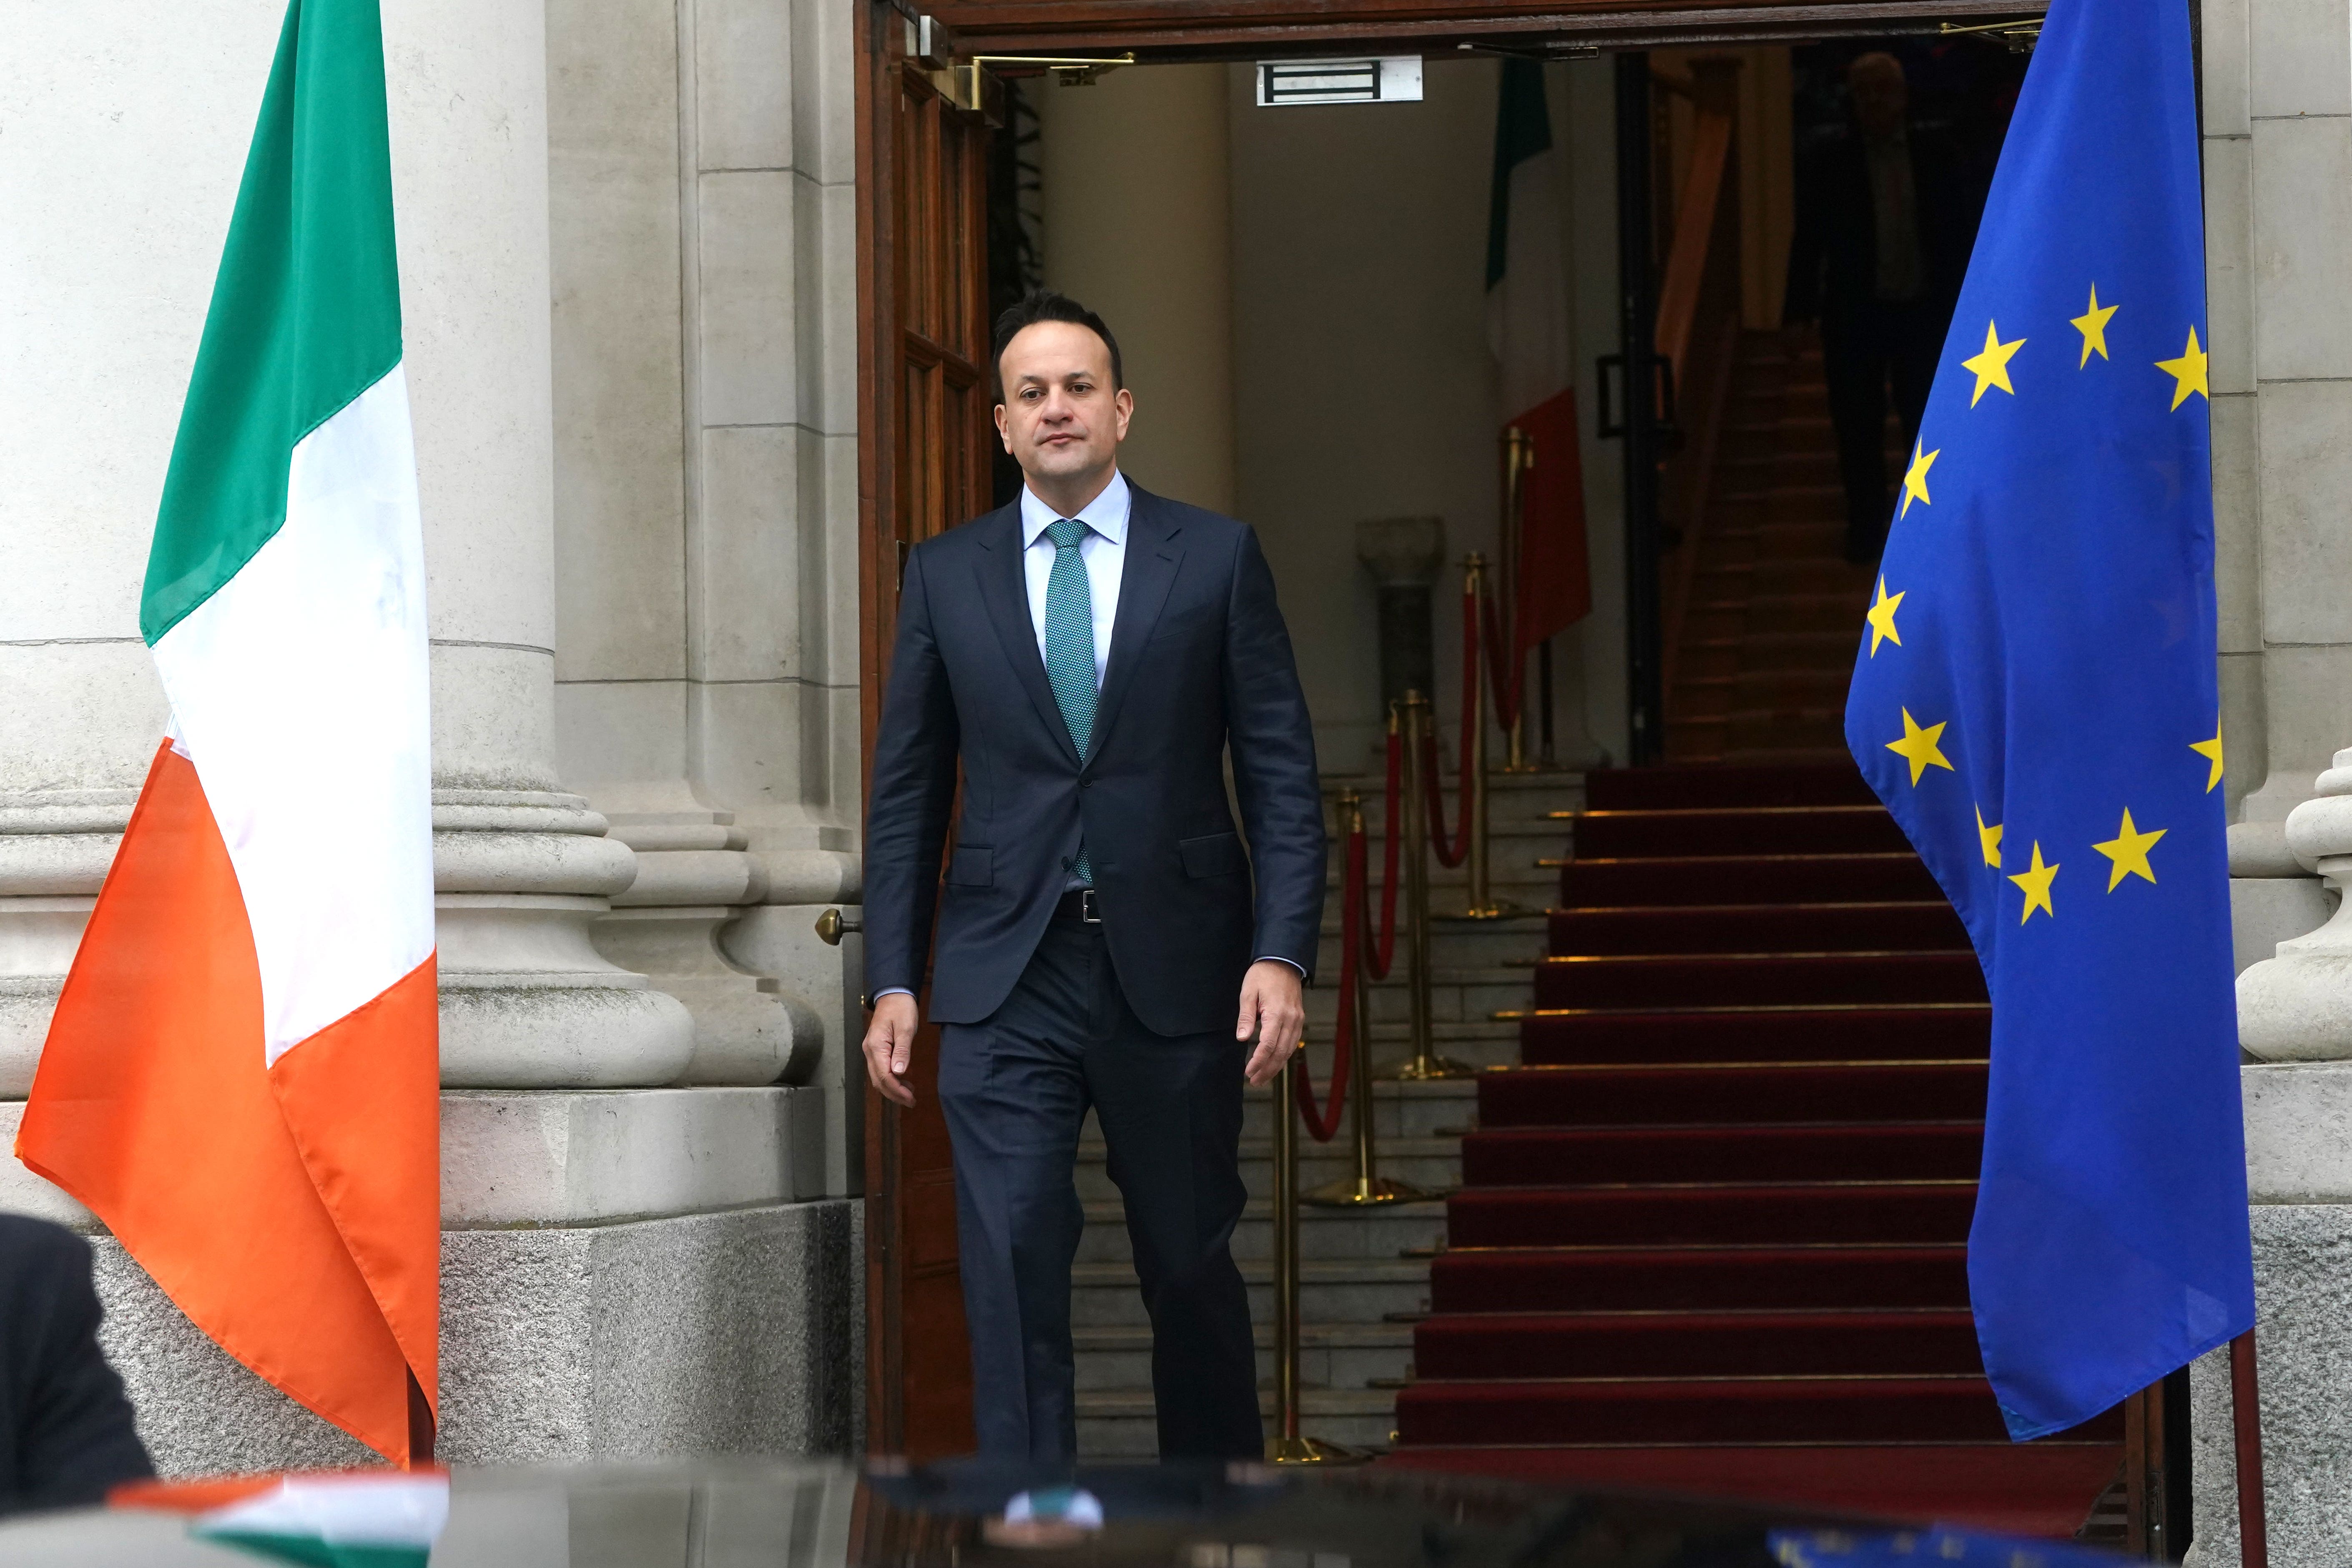 Taoiseach Leo Varadkar waiting to welcome President of the European Parliament, Roberta Metsola, at Government Buildings in Dublin during her two-day visit to the Republic of Ireland. Picture date: Thursday February 2, 2023.